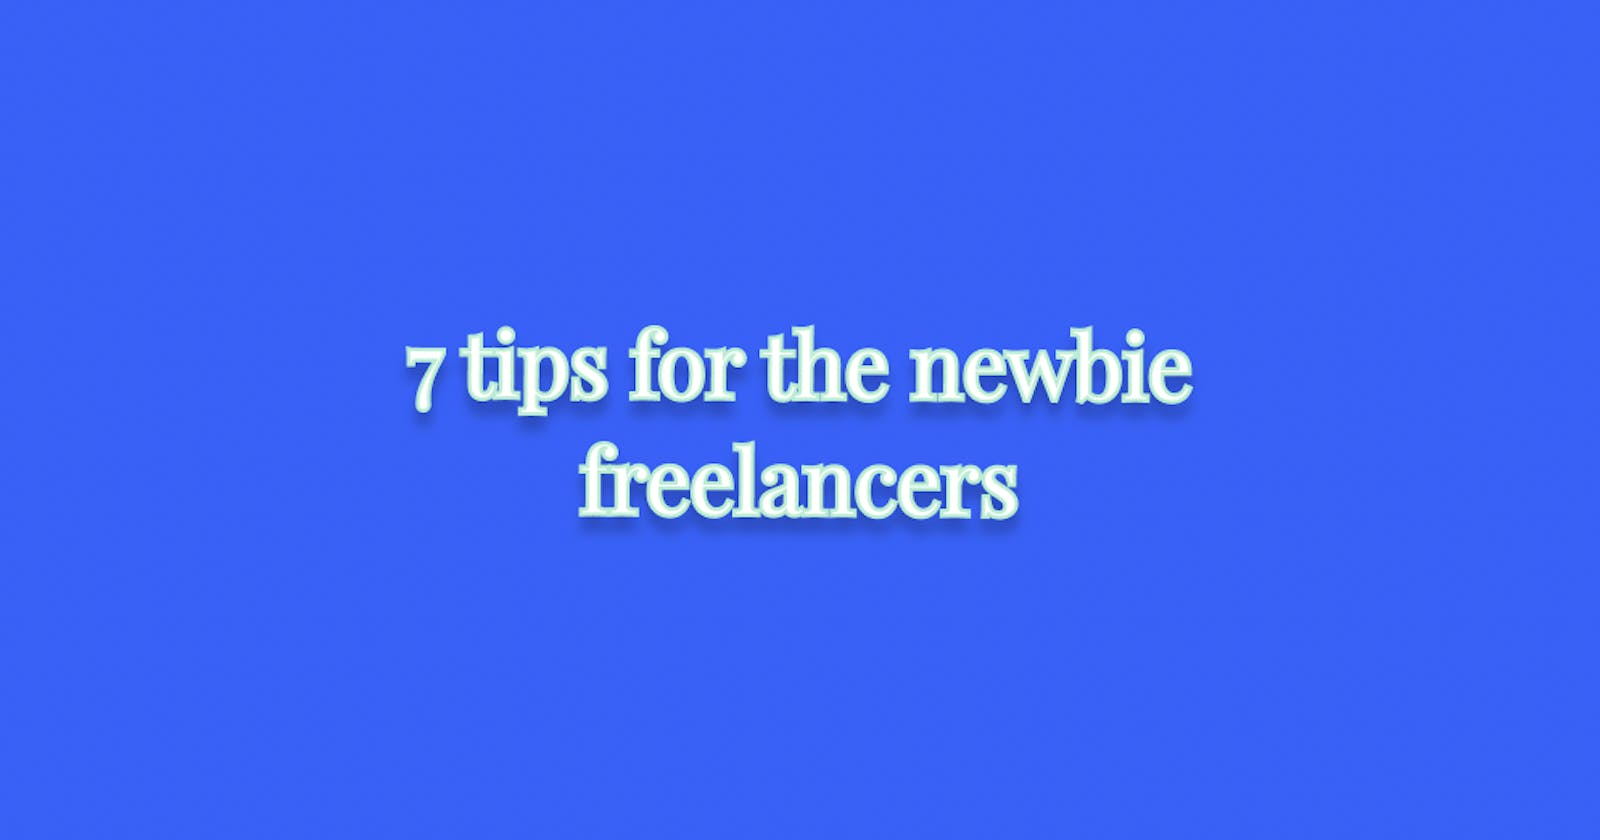 7 tips for the newbie freelancers